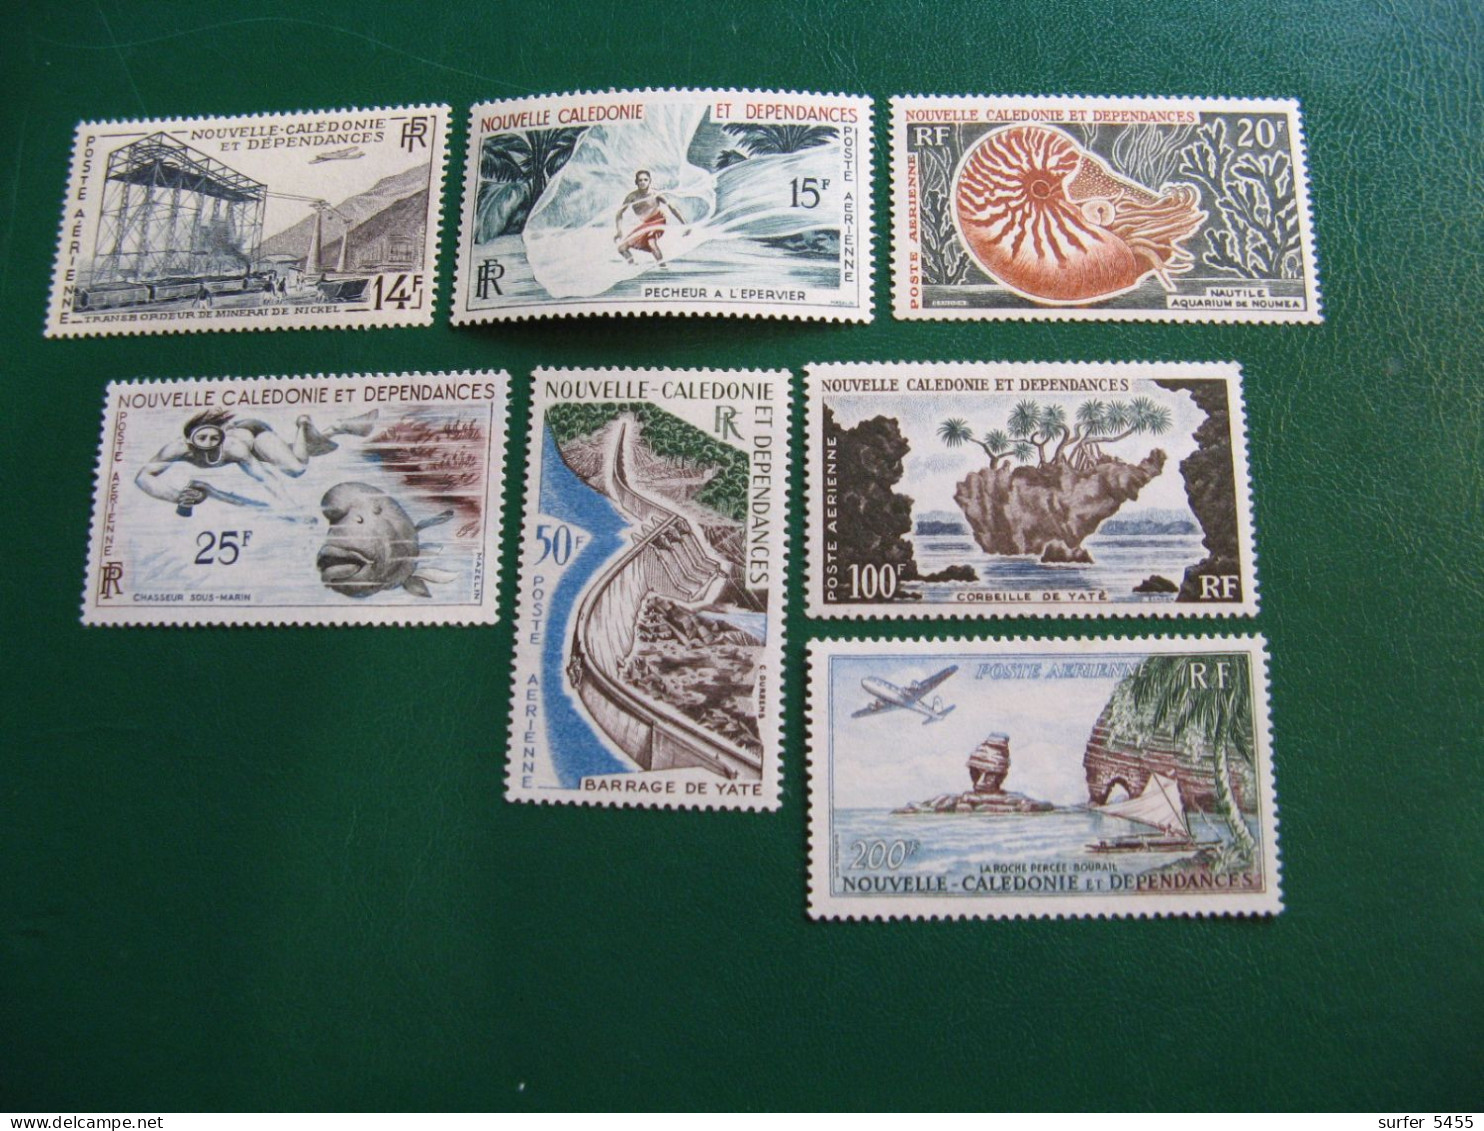 NOUVELLE CALEDONIE YVERT POSTE AERIENNE N° 66/72 TIMBRES NEUFS** LUXE - MNH - COTE 153,00 EUROS - Neufs